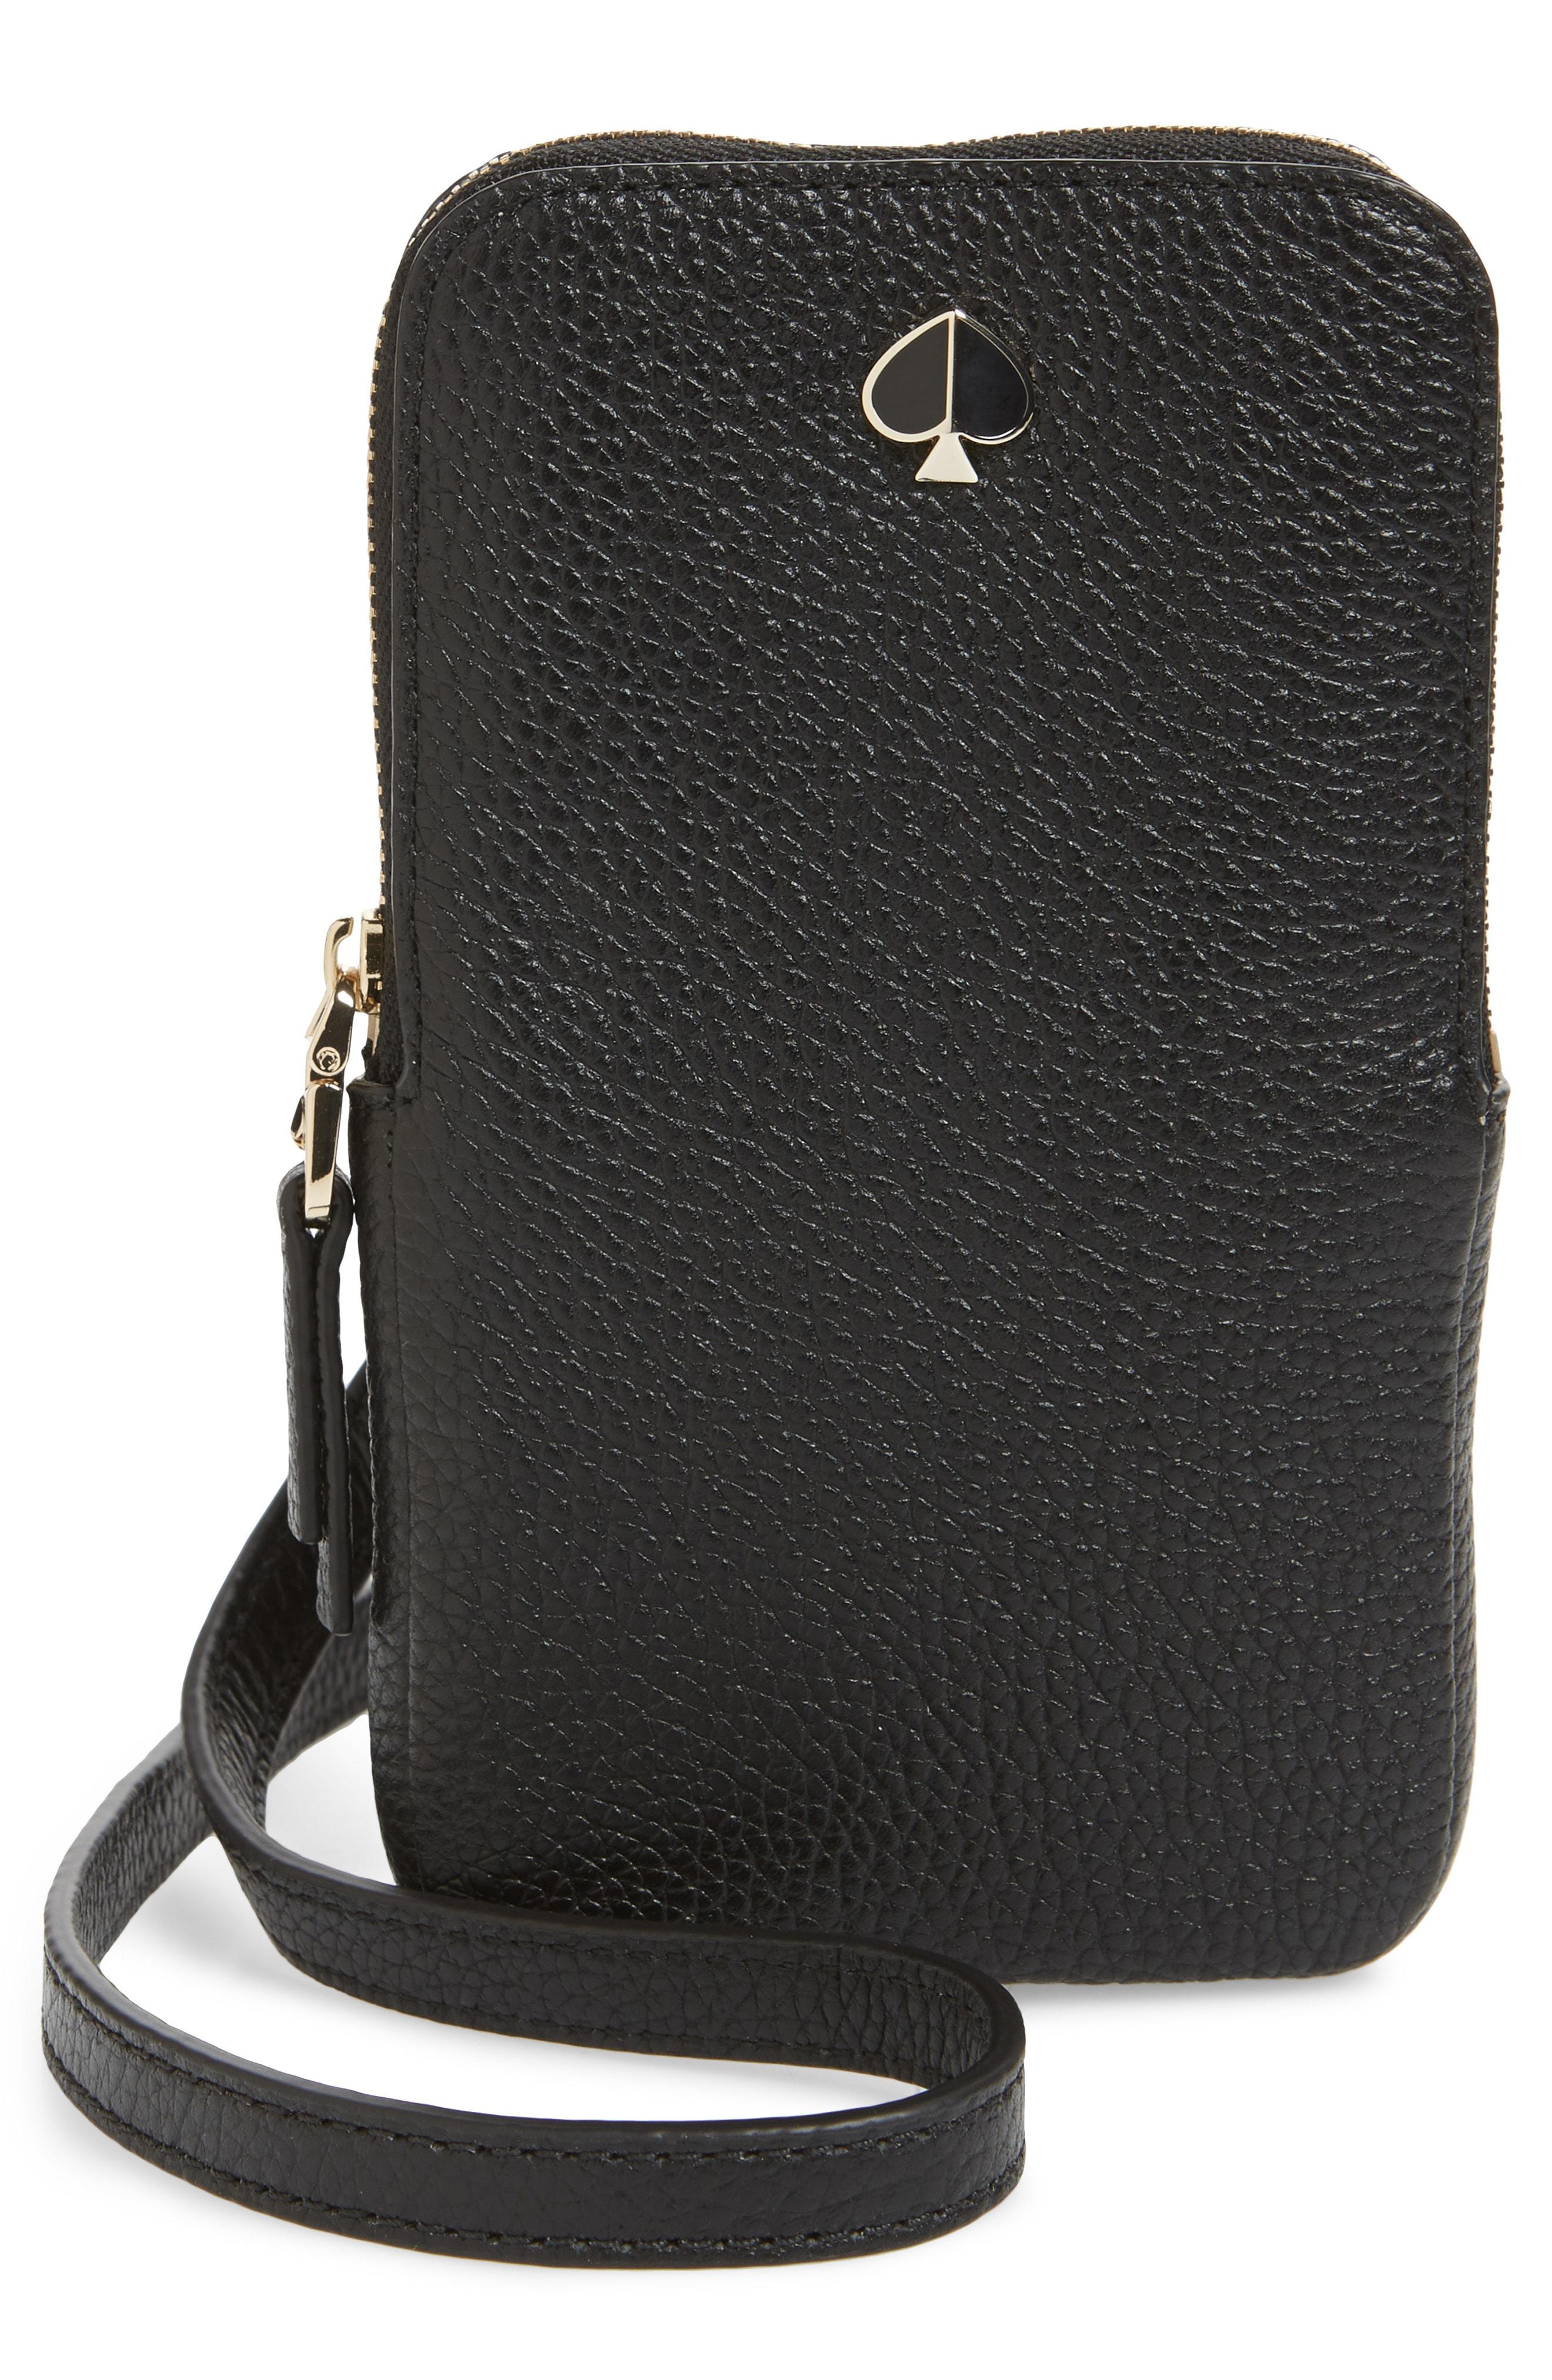 Lyst - Kate Spade Polly Leather Phone Crossbody Bag in Black